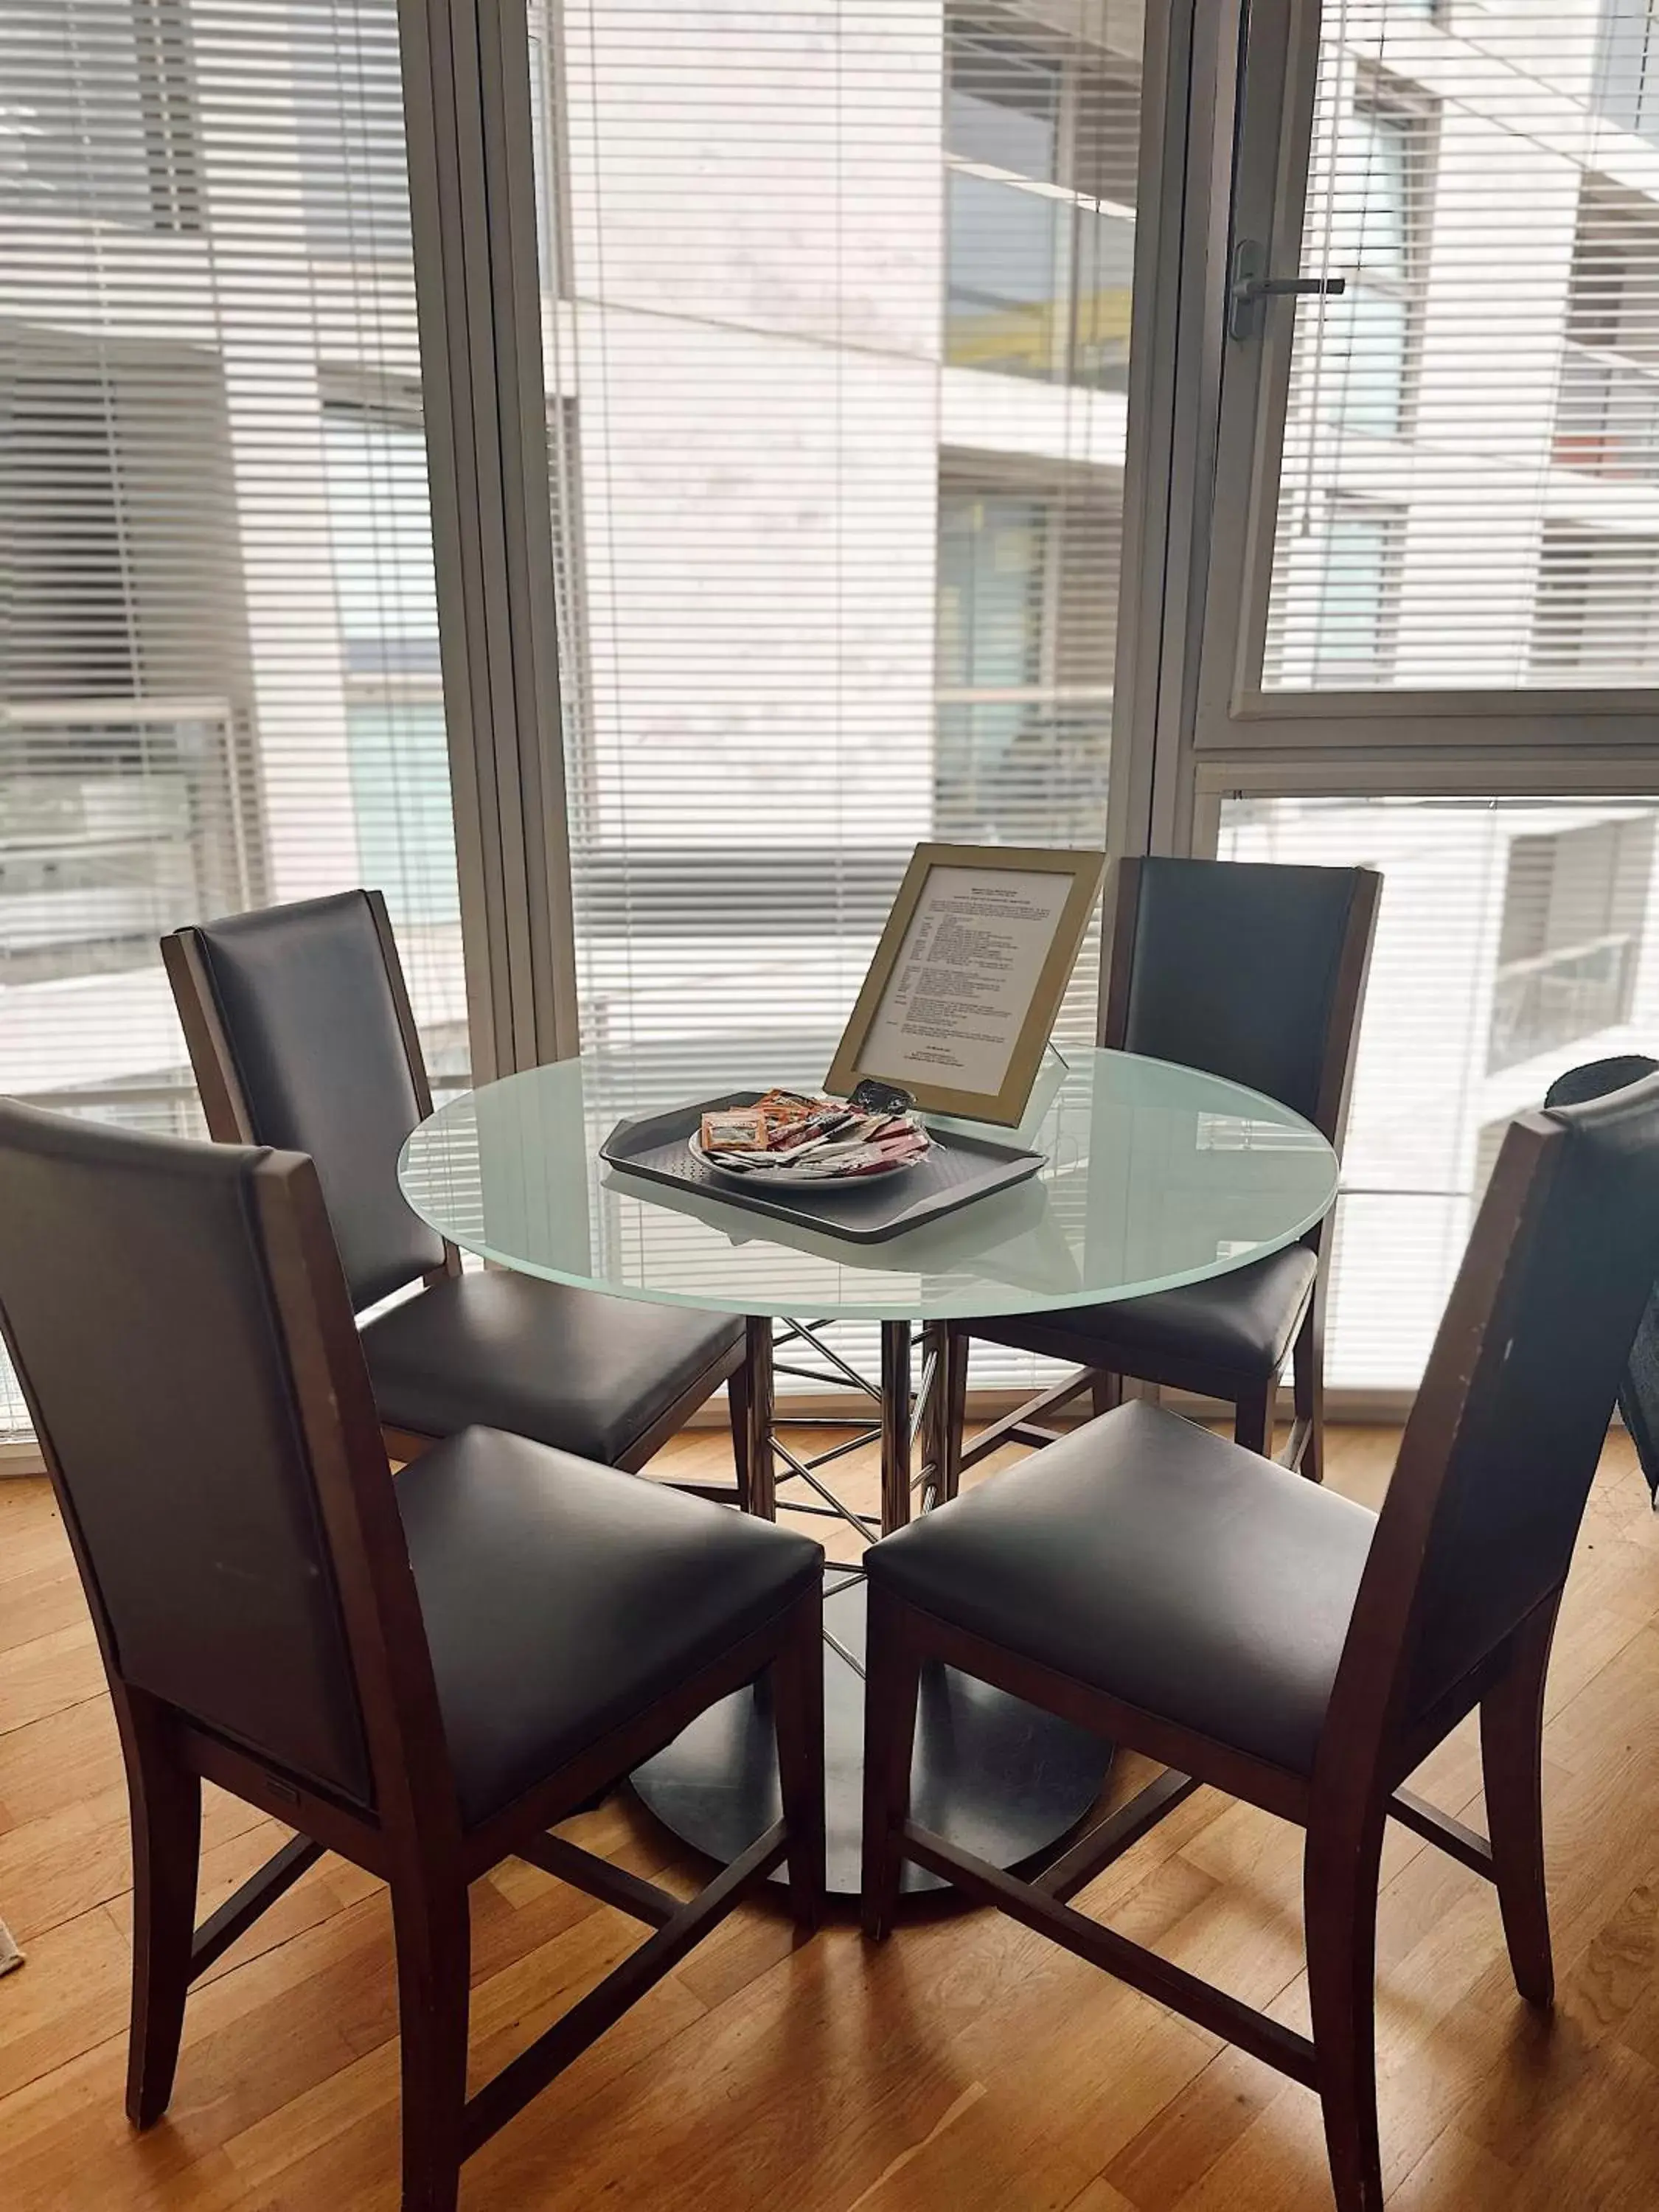 Dining area in Canary Wharf - Luxury Apartments